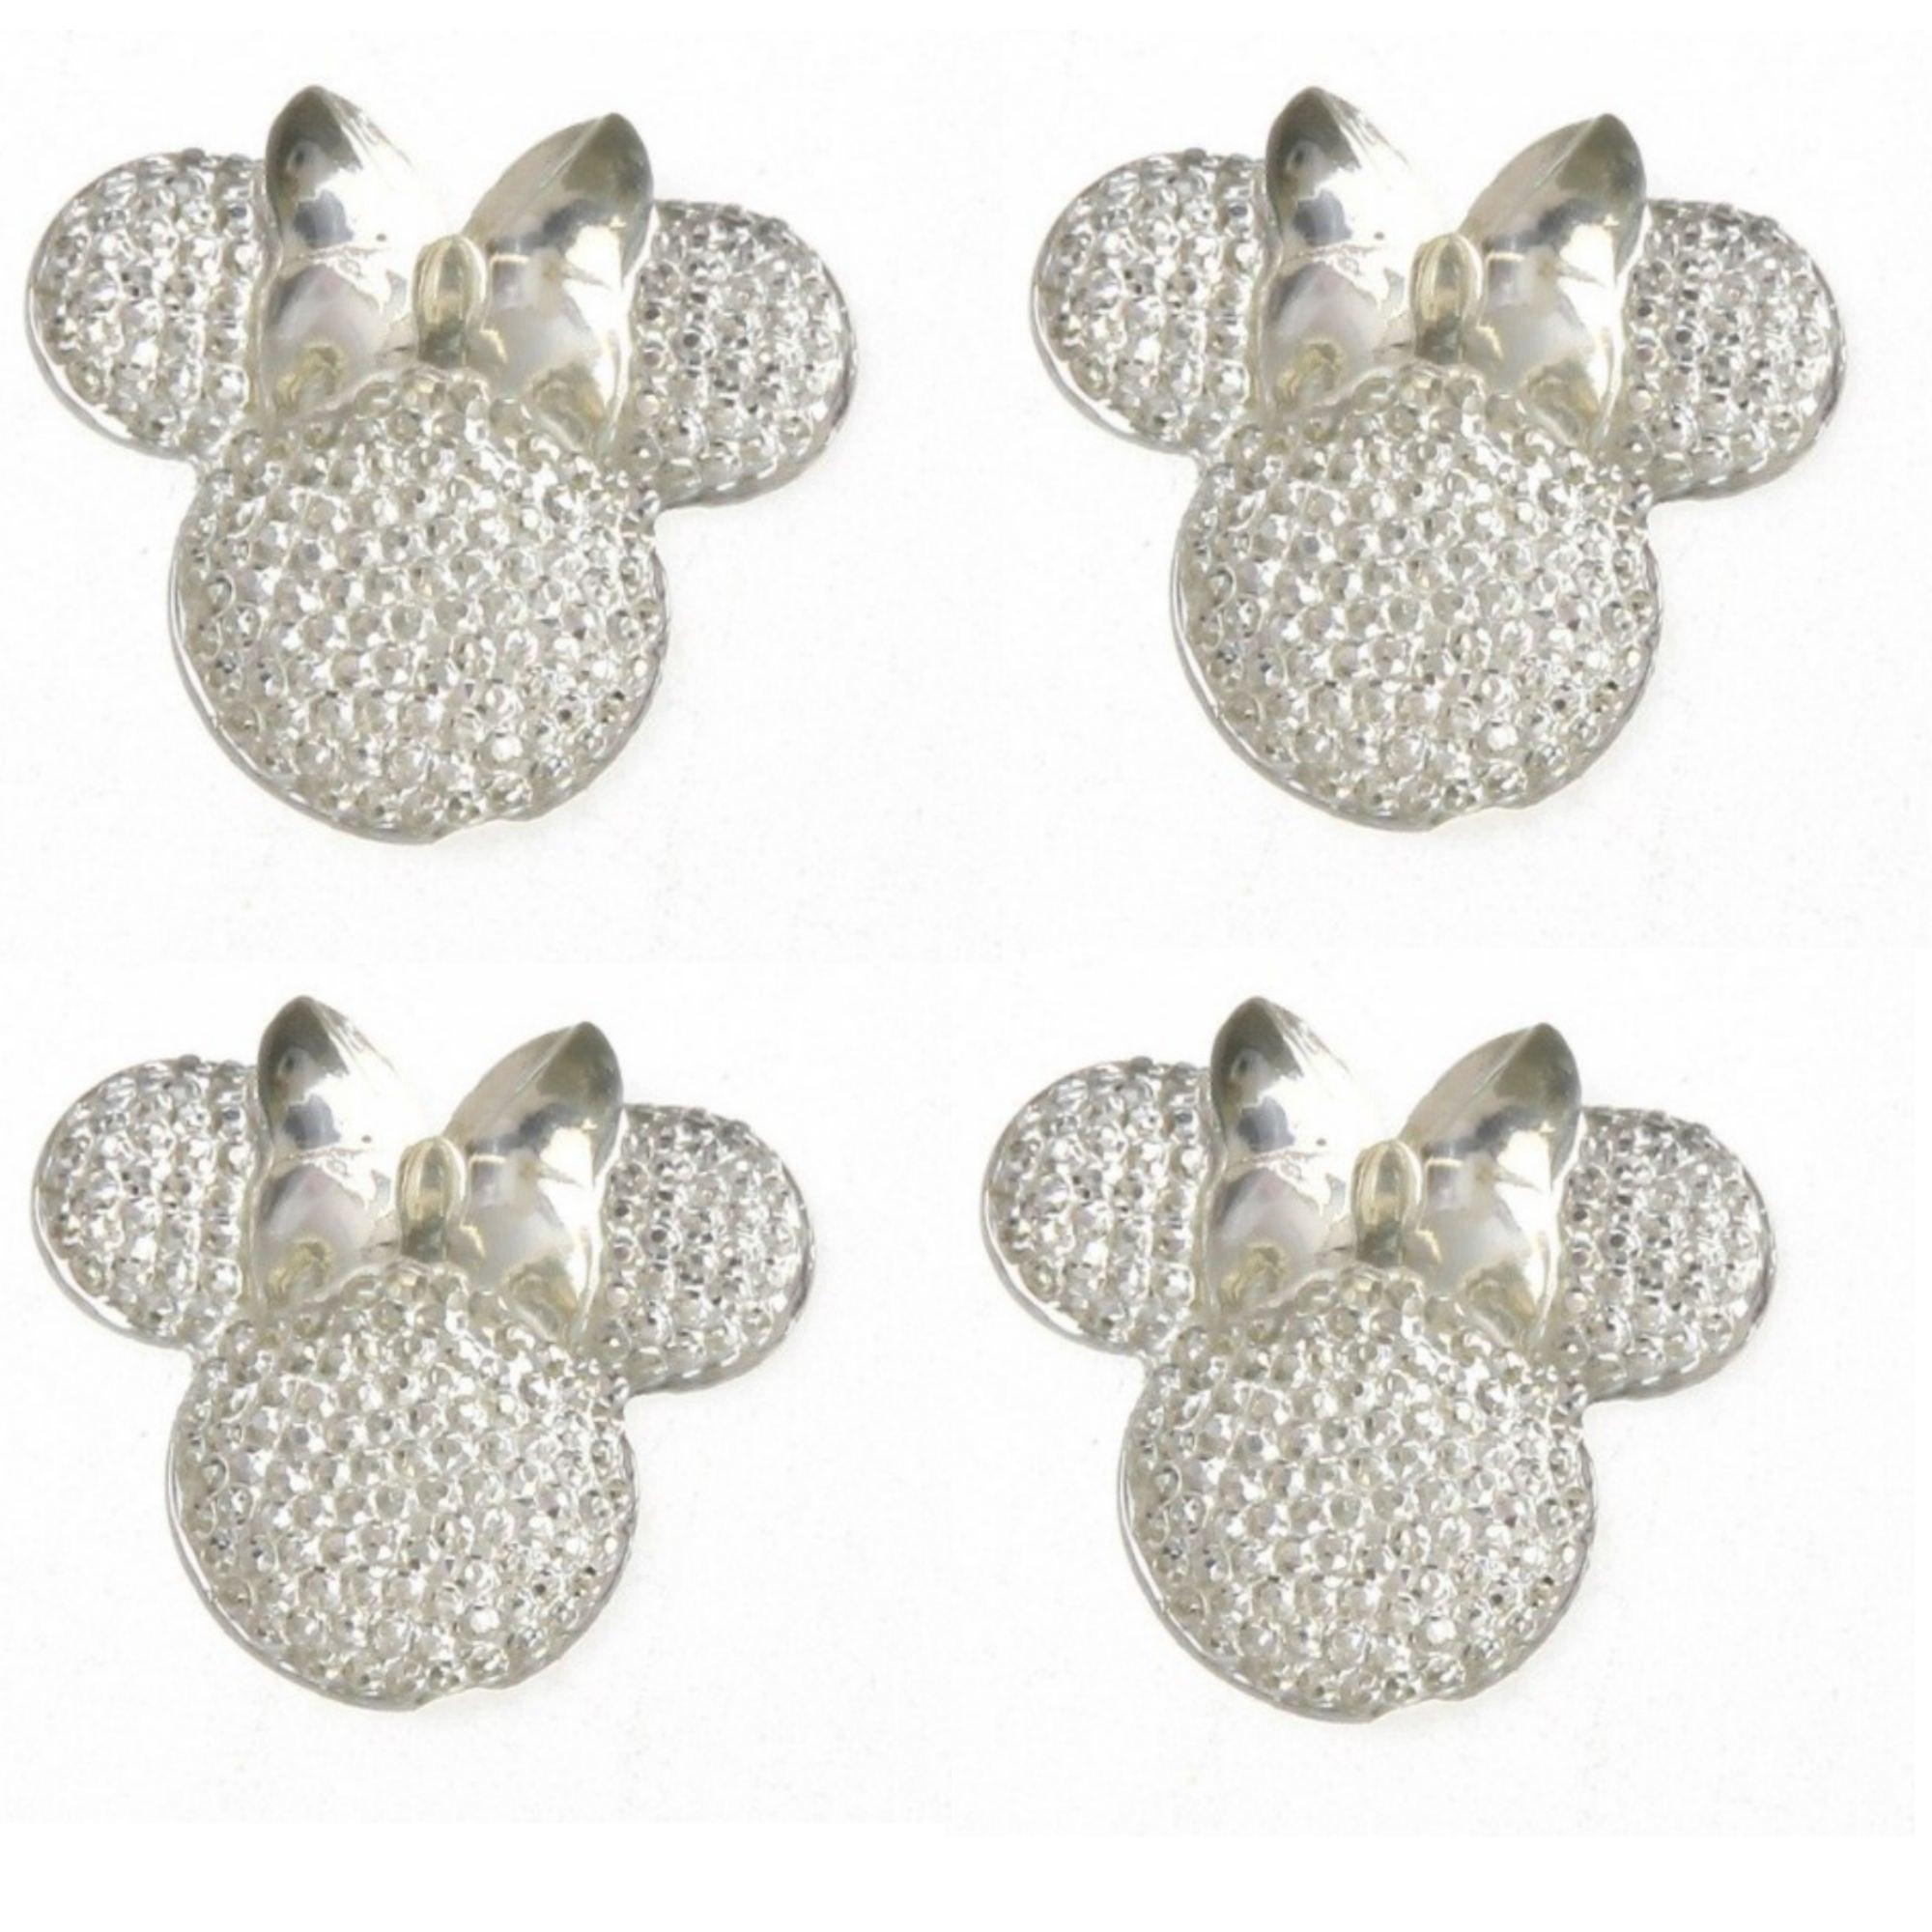 Disneyana Collection 1" Bling White Mouse Ears & Bow Scrapbook Embellishments by SSC Designs - 4 Pieces